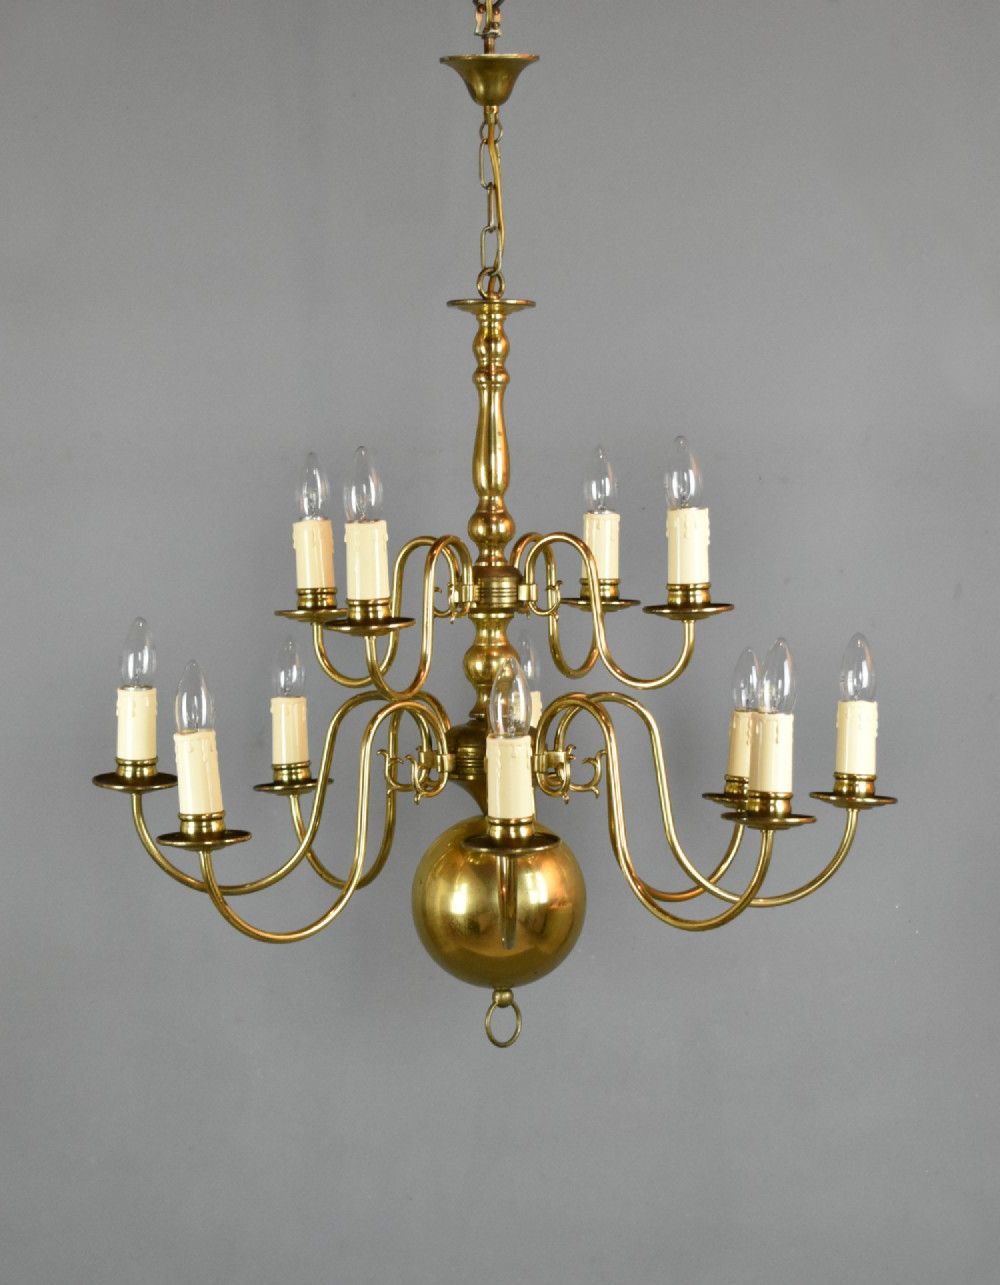 Antique Dutch Style Twelve Branch Two Tier Chandelier In Throughout Latest Marquette Two Tier Traditional Chandeliers (View 16 of 20)